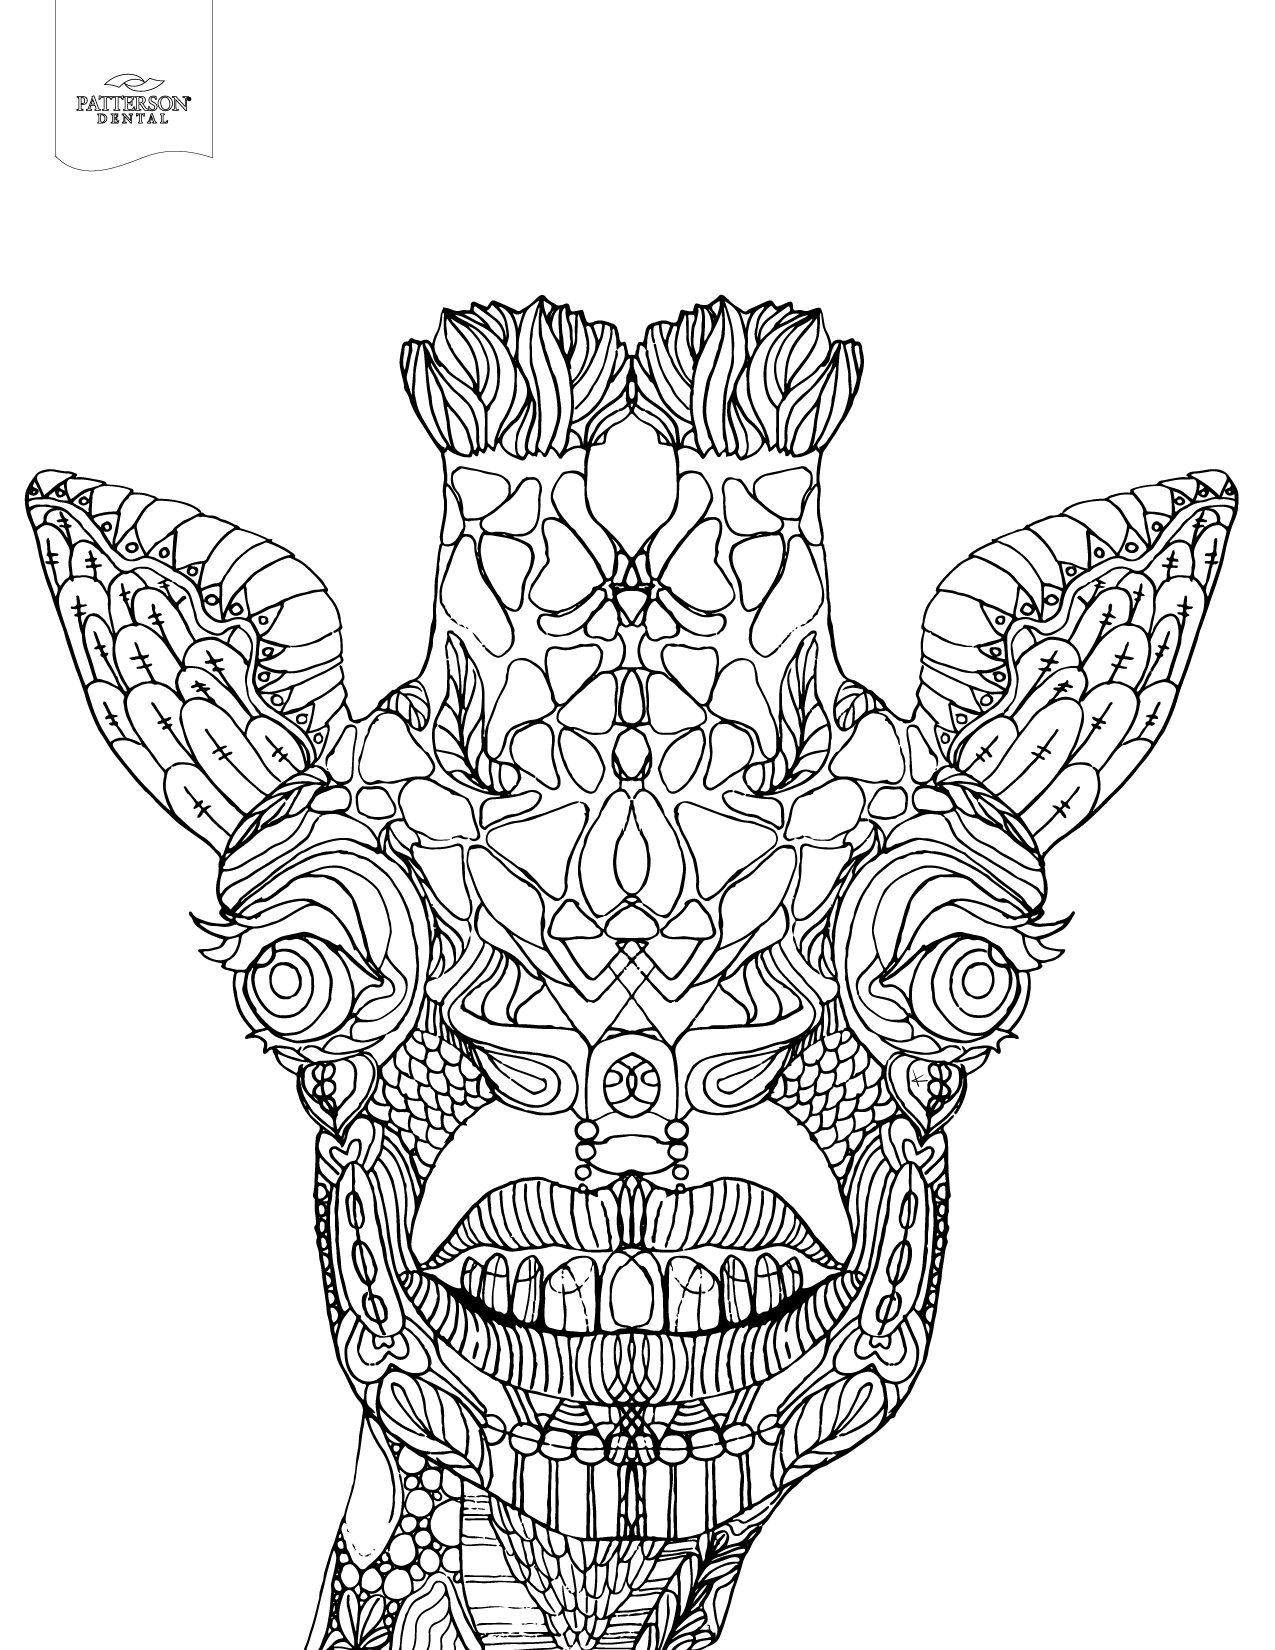 55+ Adult Coloring Pages Finished to Perfection - #7 is Stunning 196